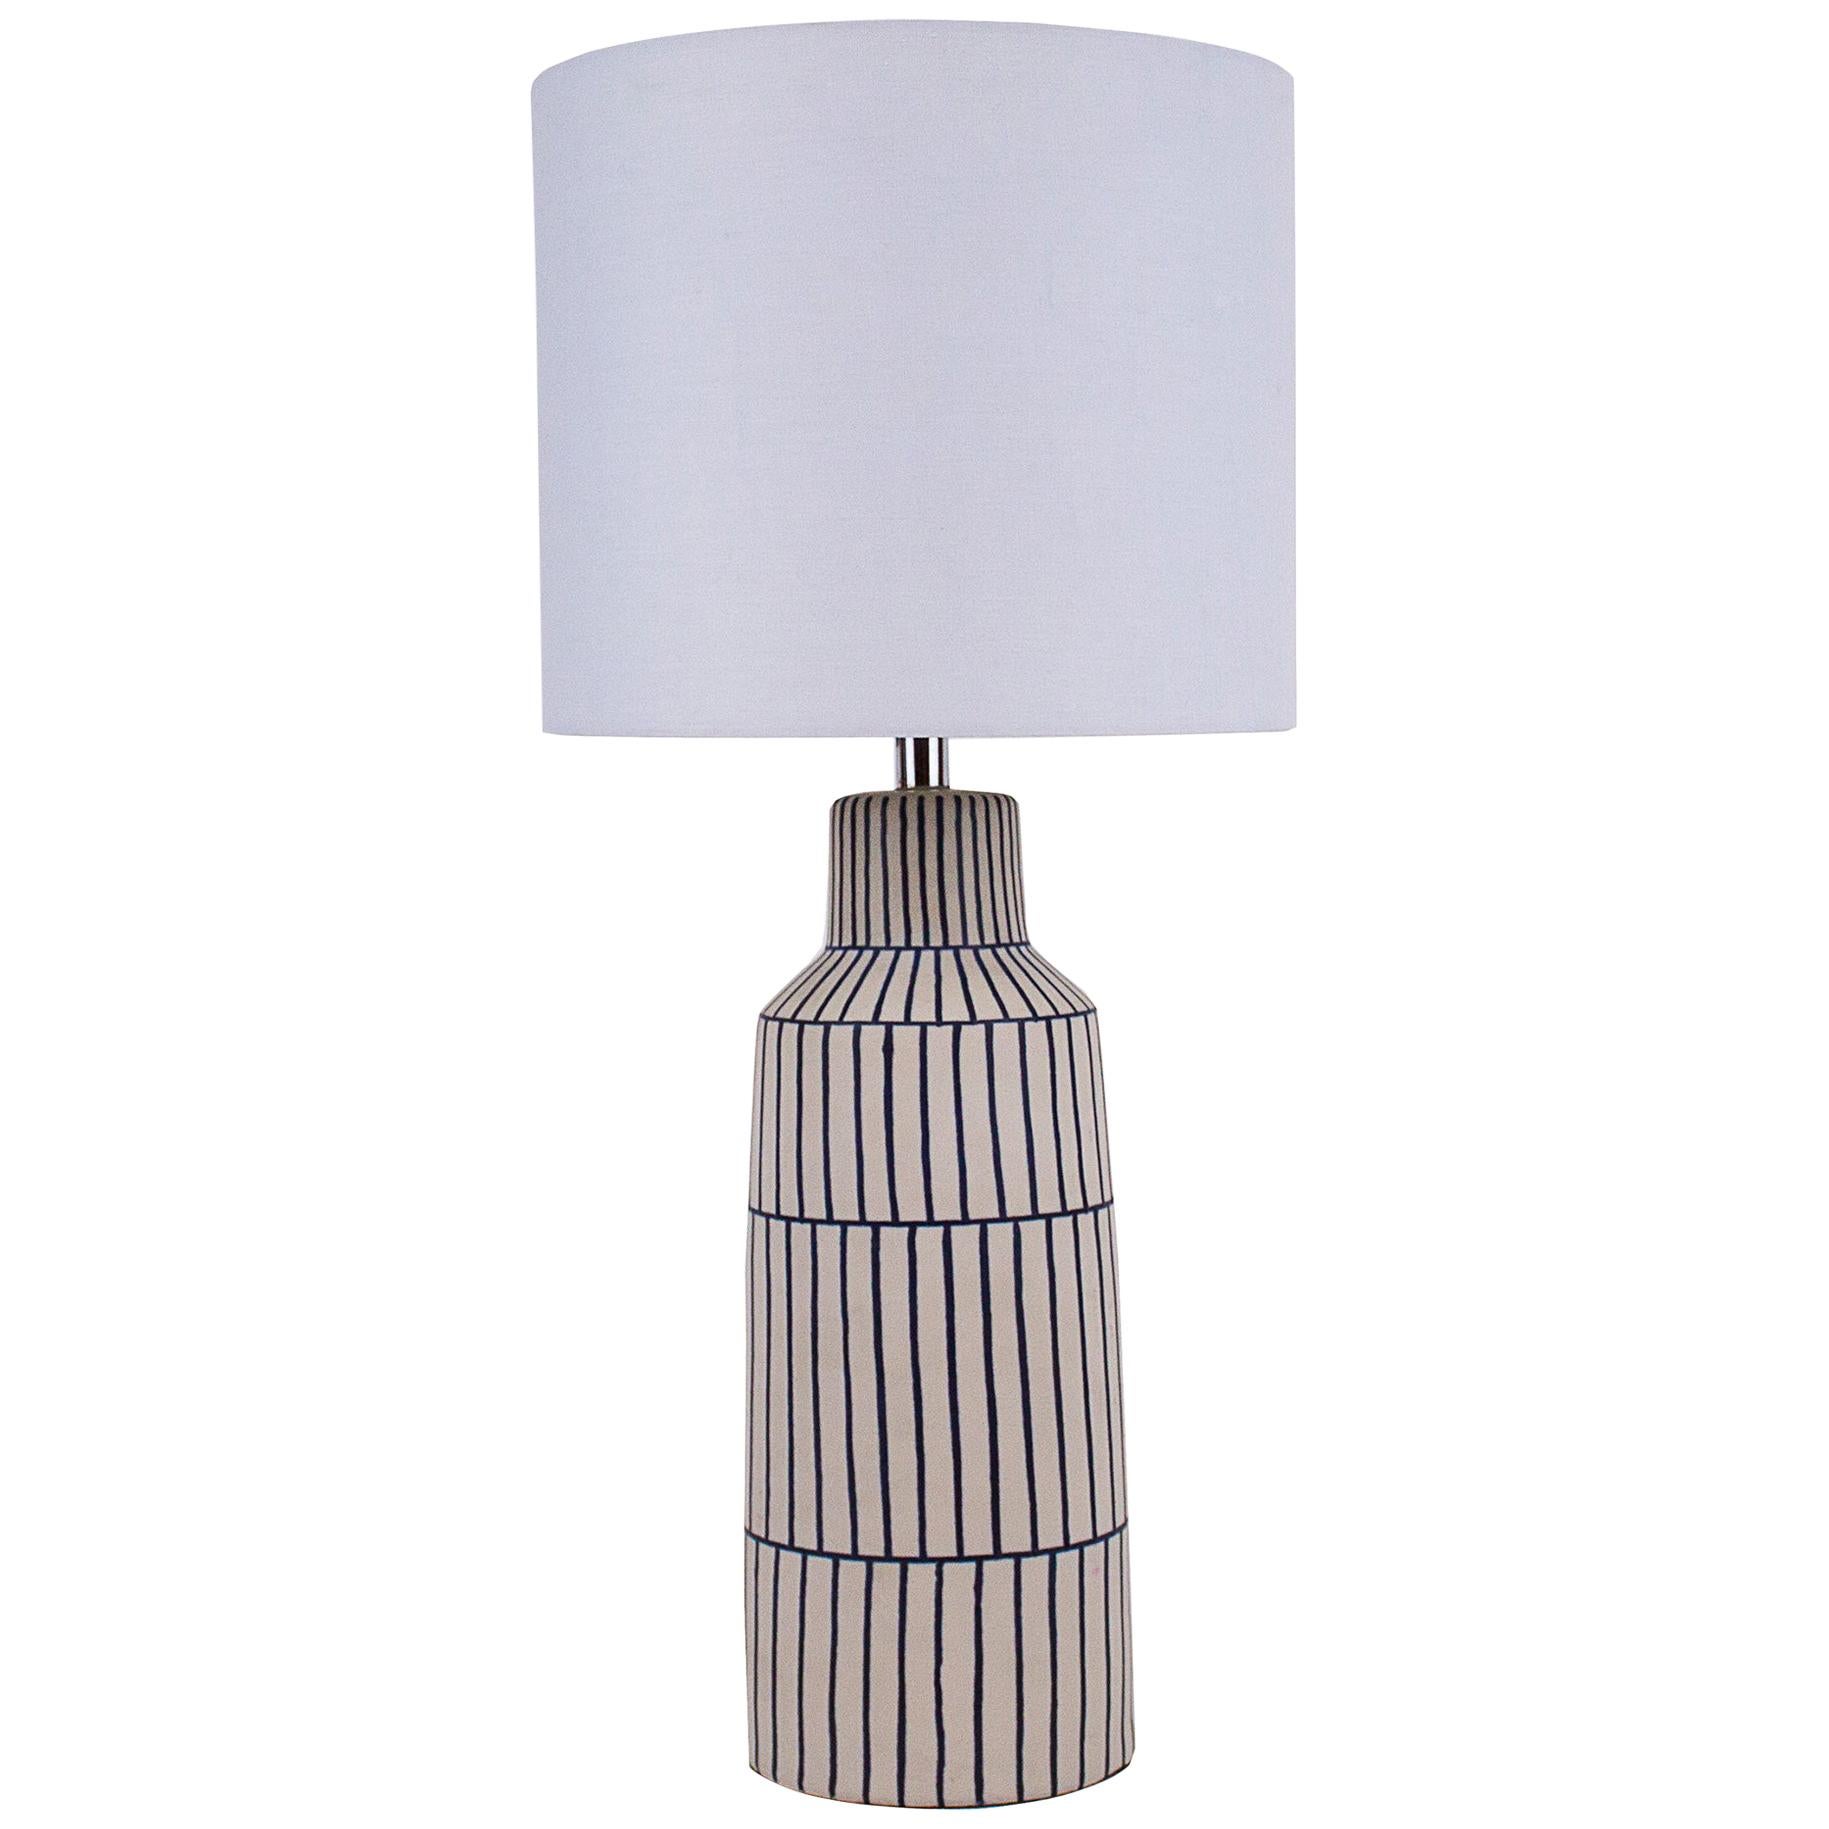 Evelyne Table Lamp in Blue and White Ceramic by Curatedkravet